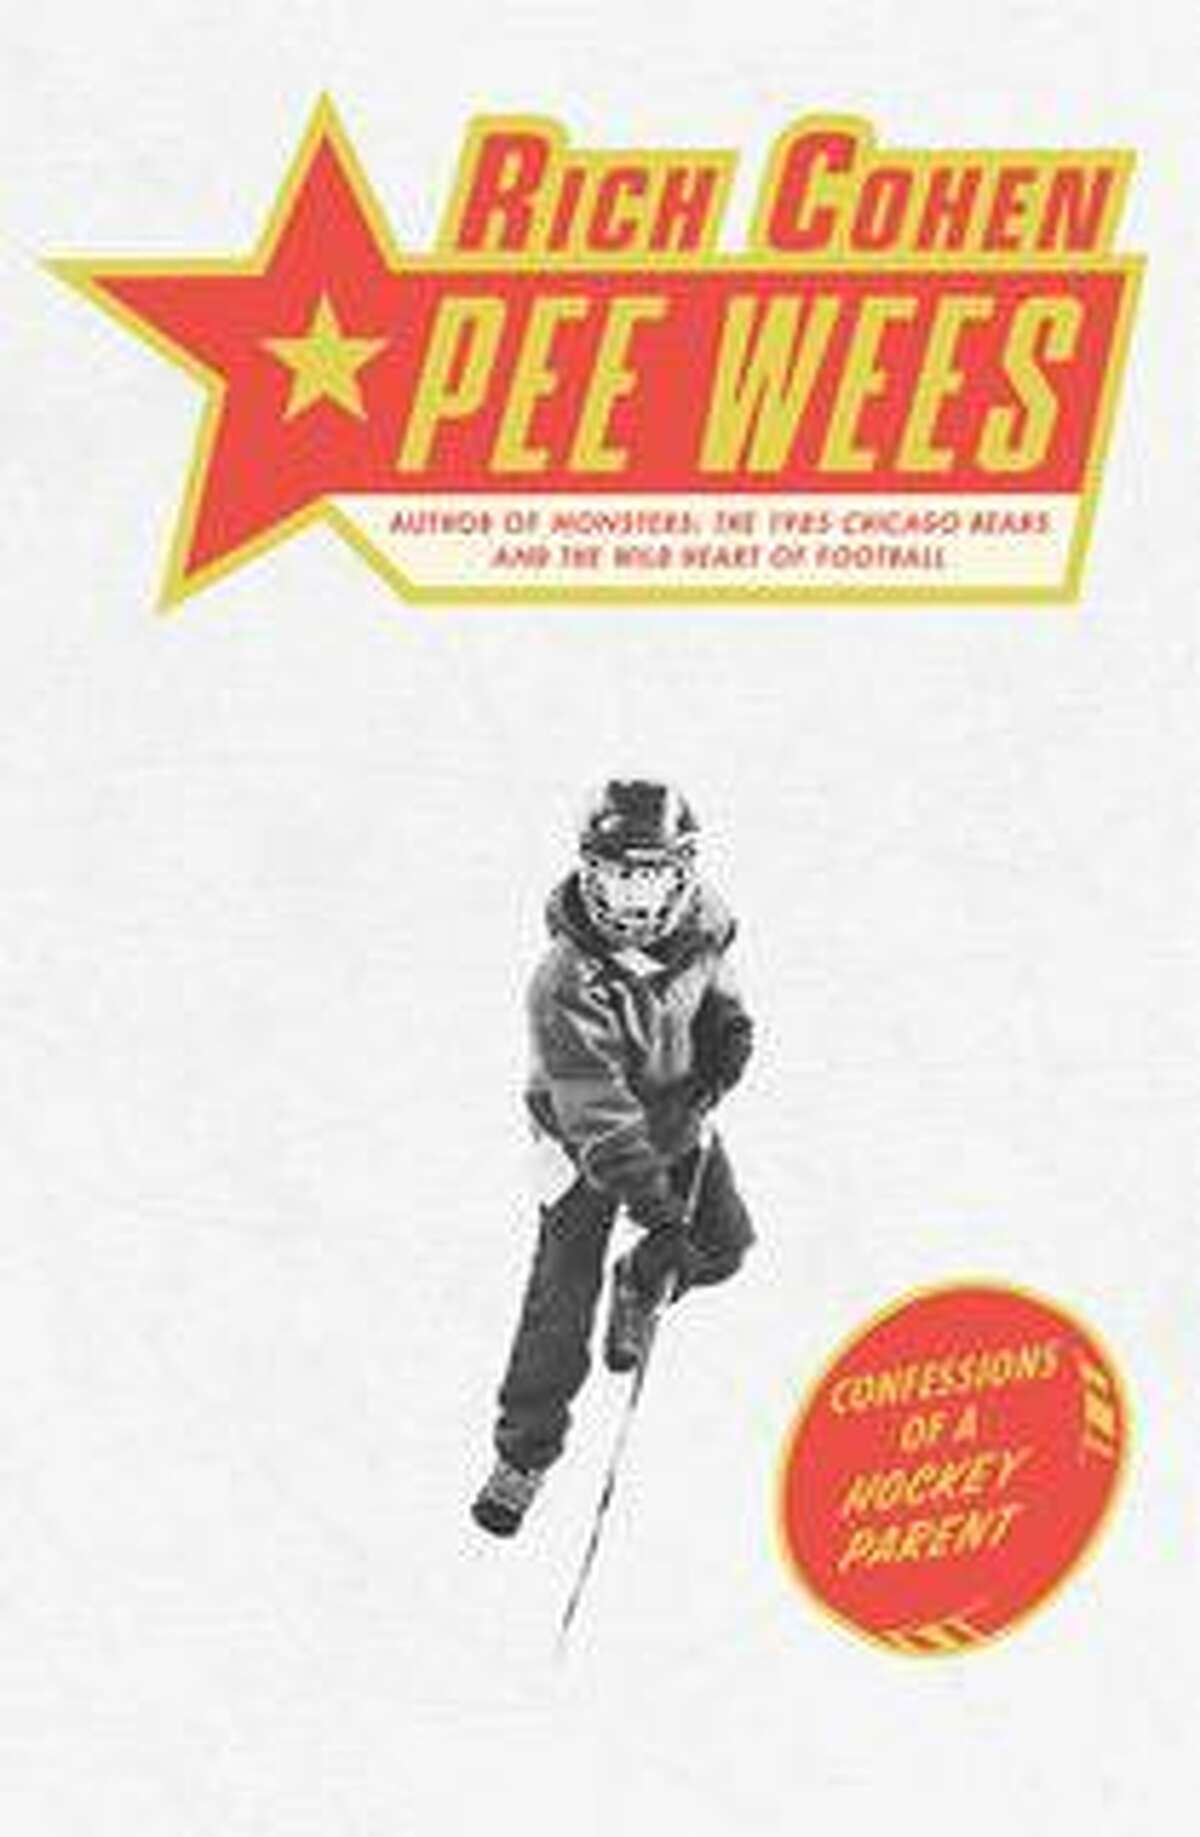 Rich Cohen’s new book, “Pee Wees: Confessions of a Hockey Parent.”